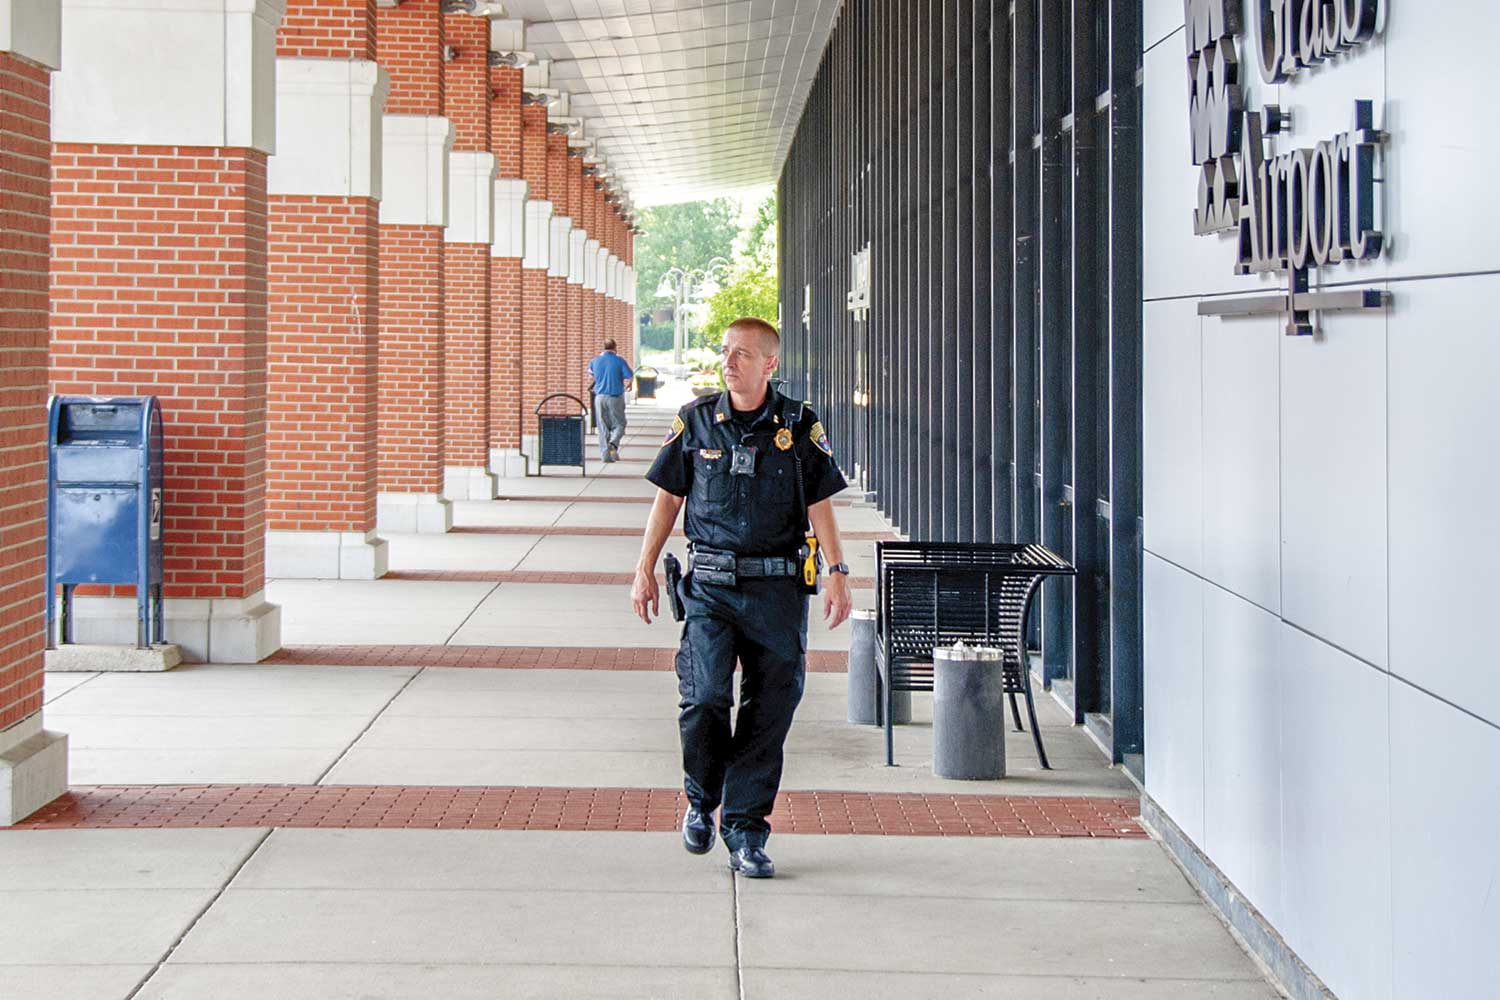  Blue Grass Airport Public Safety Capt. Keith Moore patrols outside the main terminal. (Photo by Jim Robertson) 